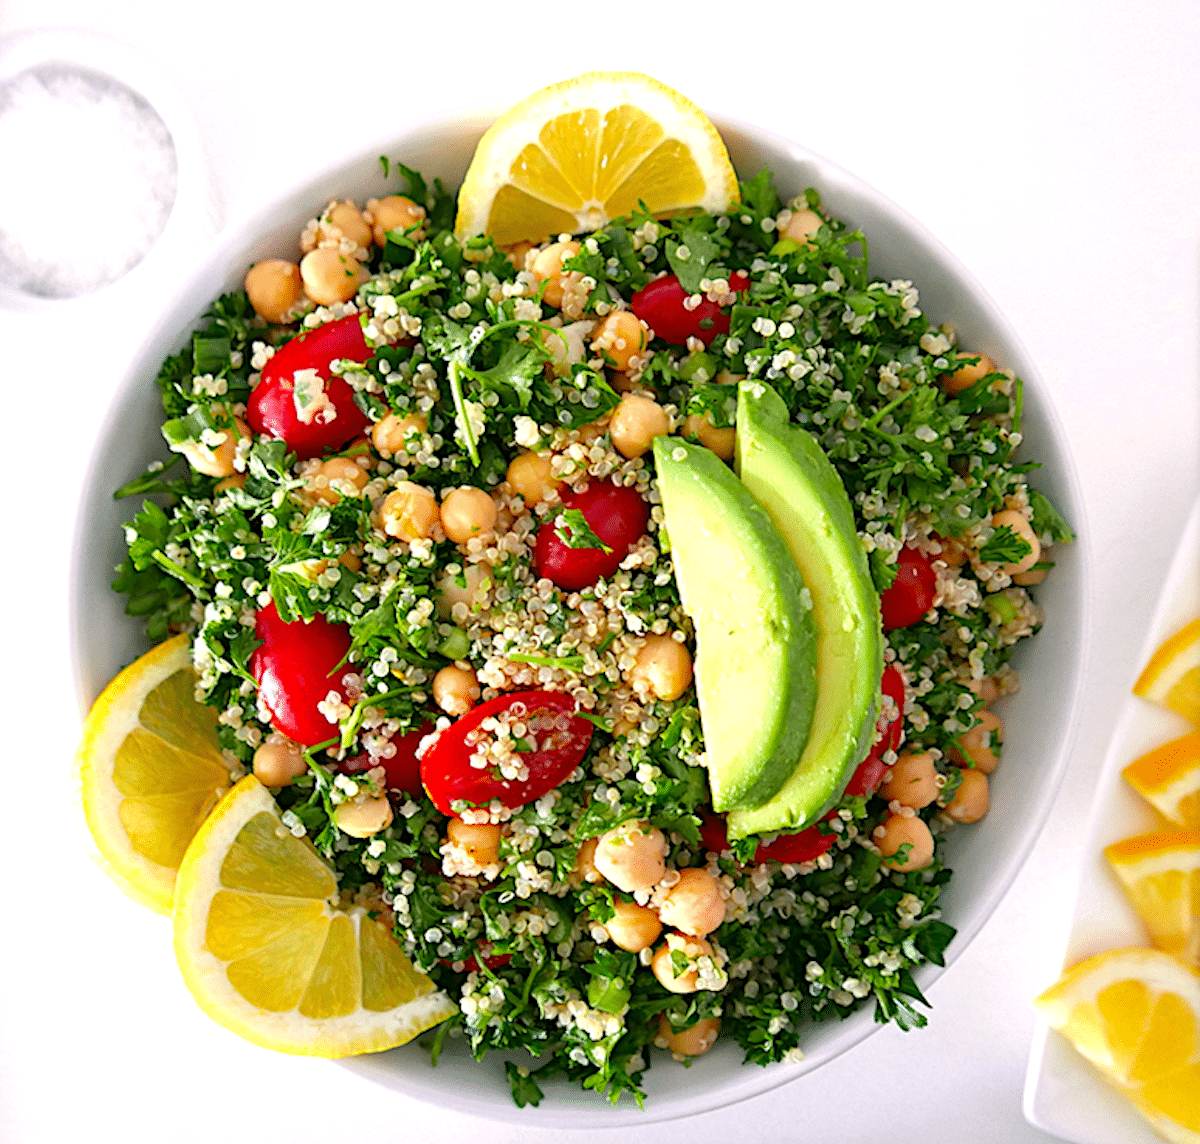 gluten free tabbouleh salad with chickpeas and avocado.